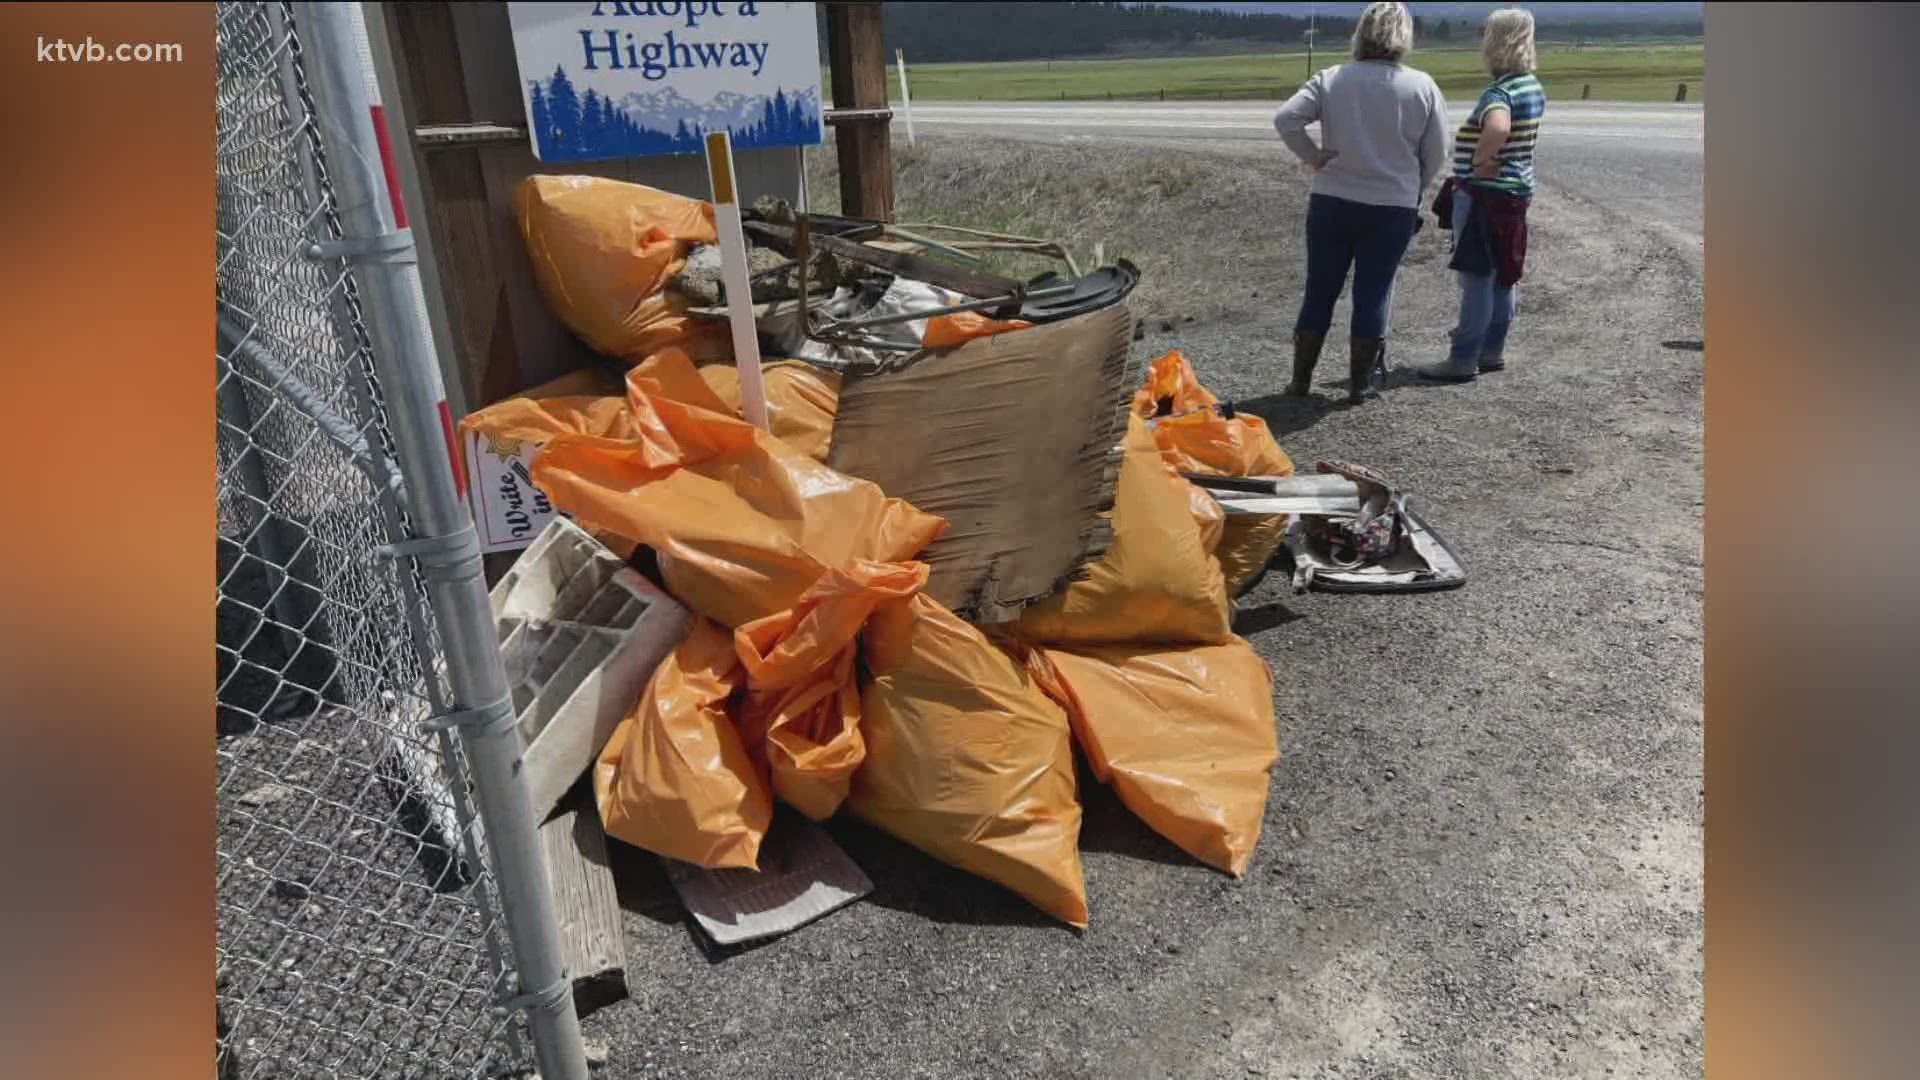 One Boise couple has picked up trash in Cascade twice in one year, gathering as much as 26 garbage bags worth of trash in a one-mile stretch.